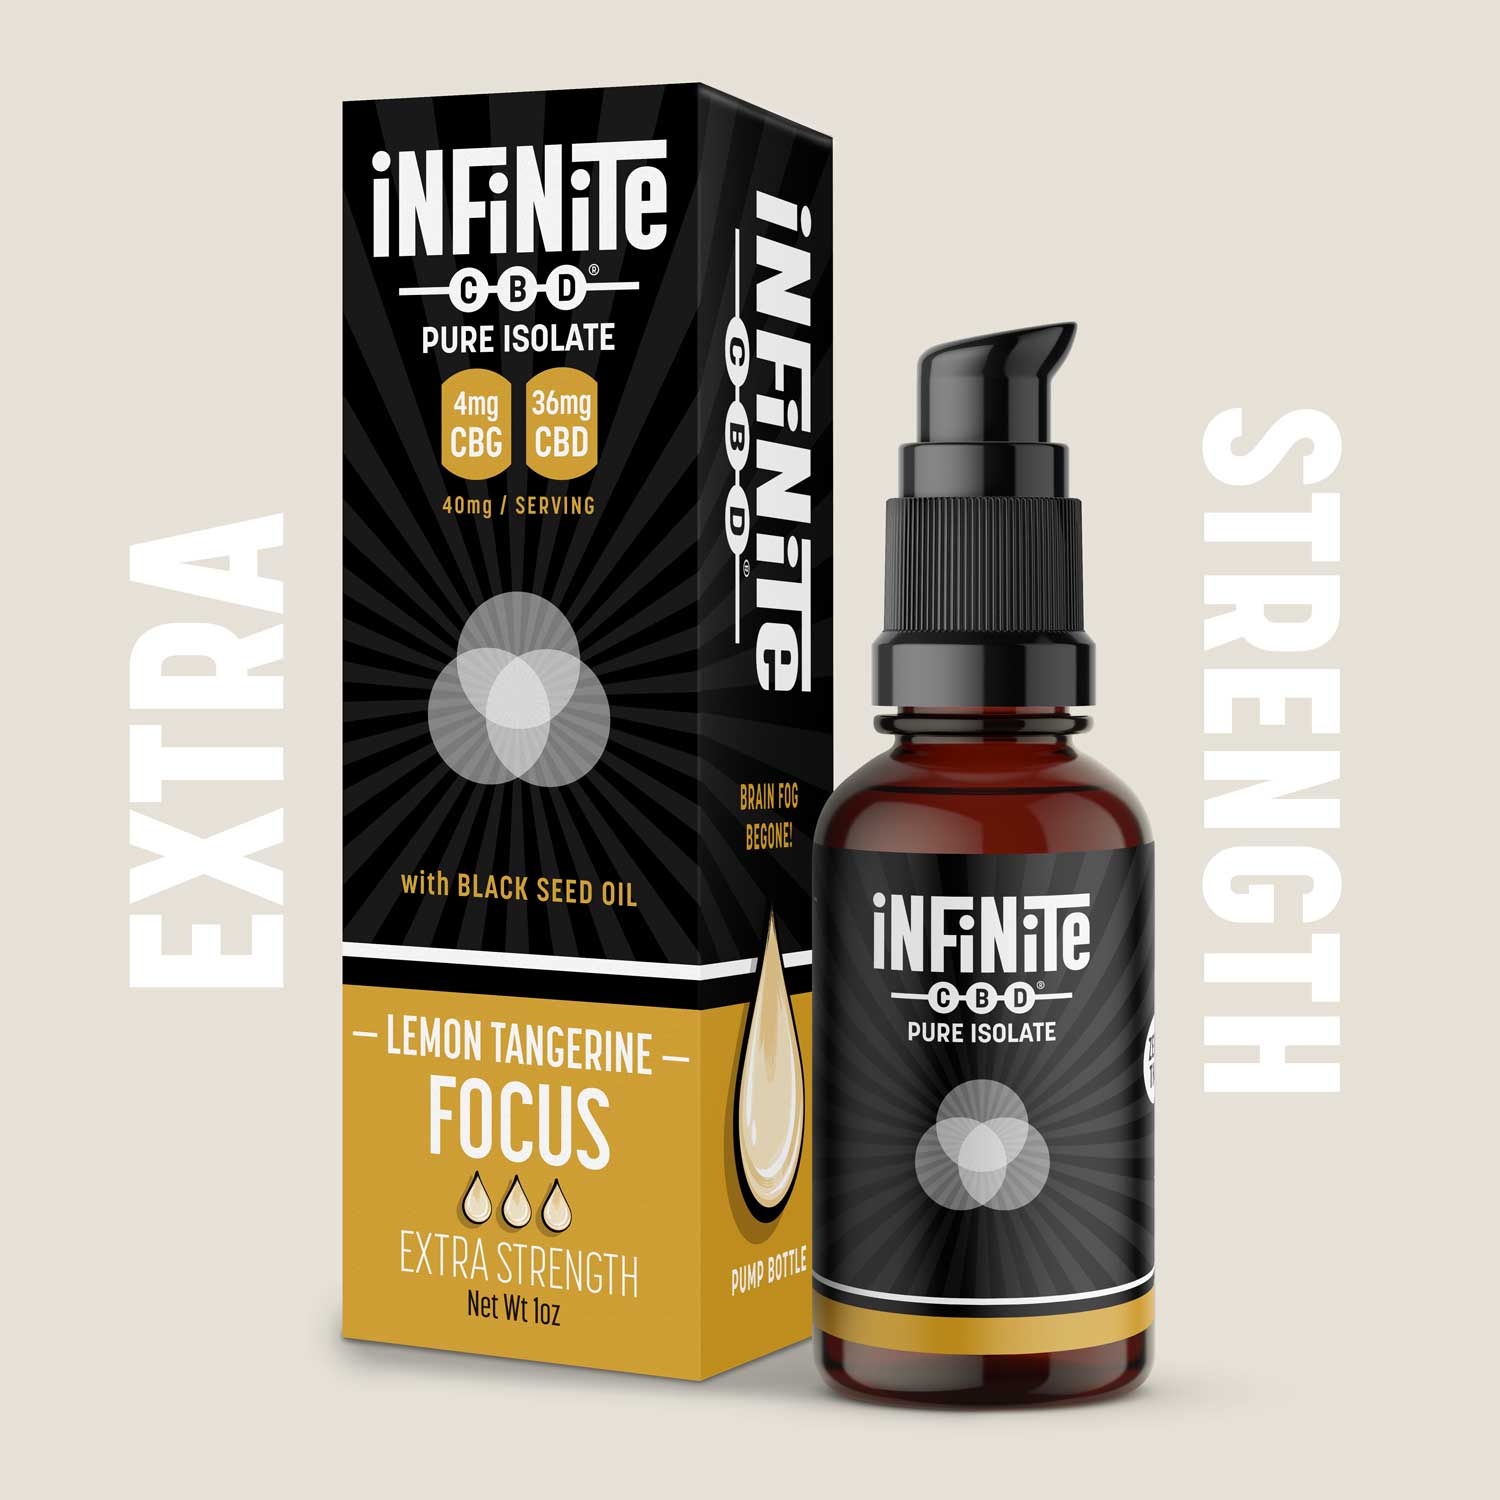 Tinctures<br>Formulation: Focus<br>CBD: Pure Isolate (Zero THC)<br>Strength: Extra (40mg/serving)